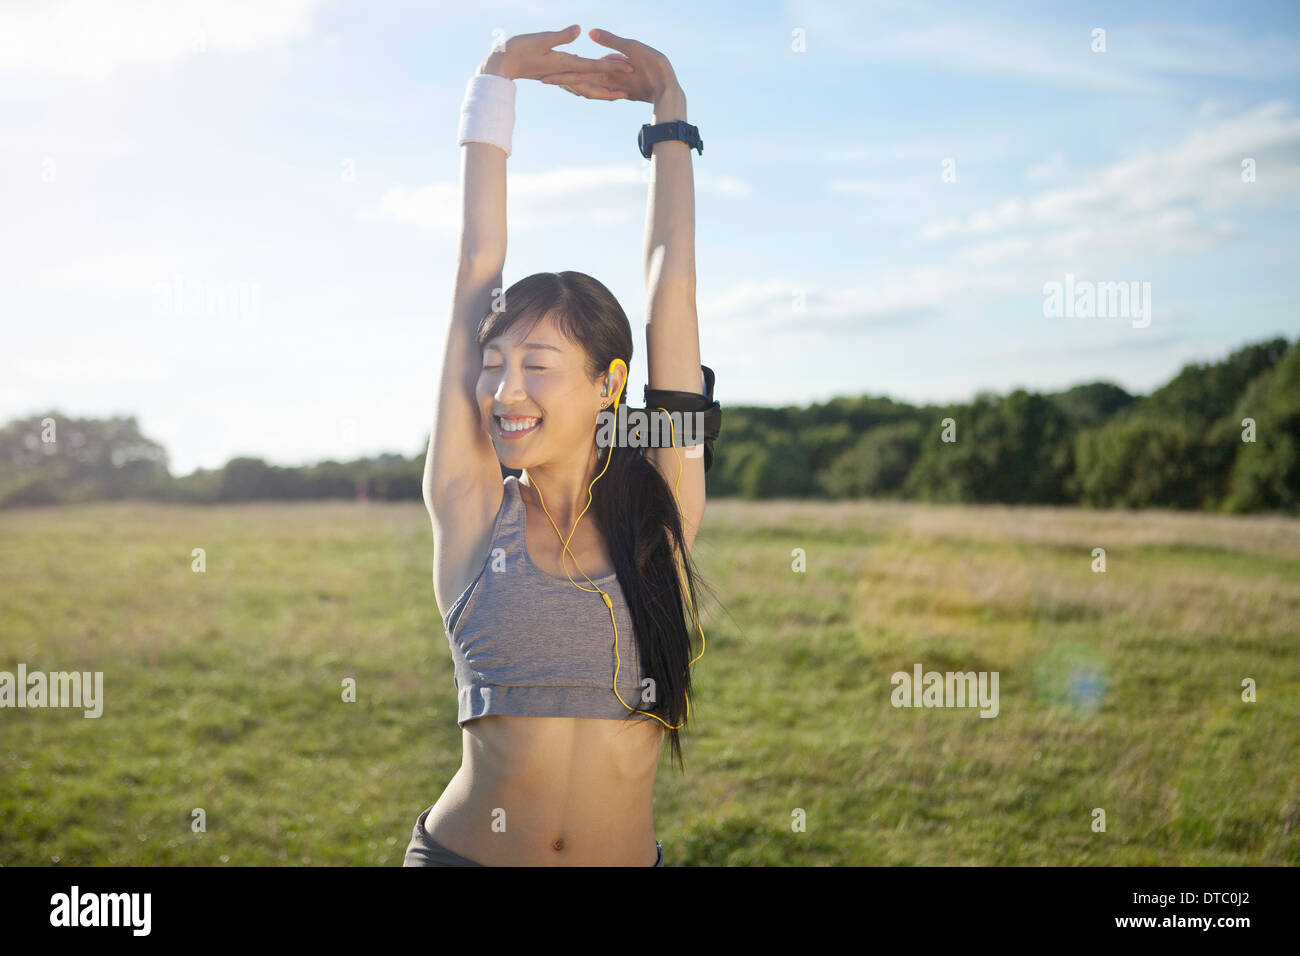 Young female runner stretching arms and warming up Stock Photo